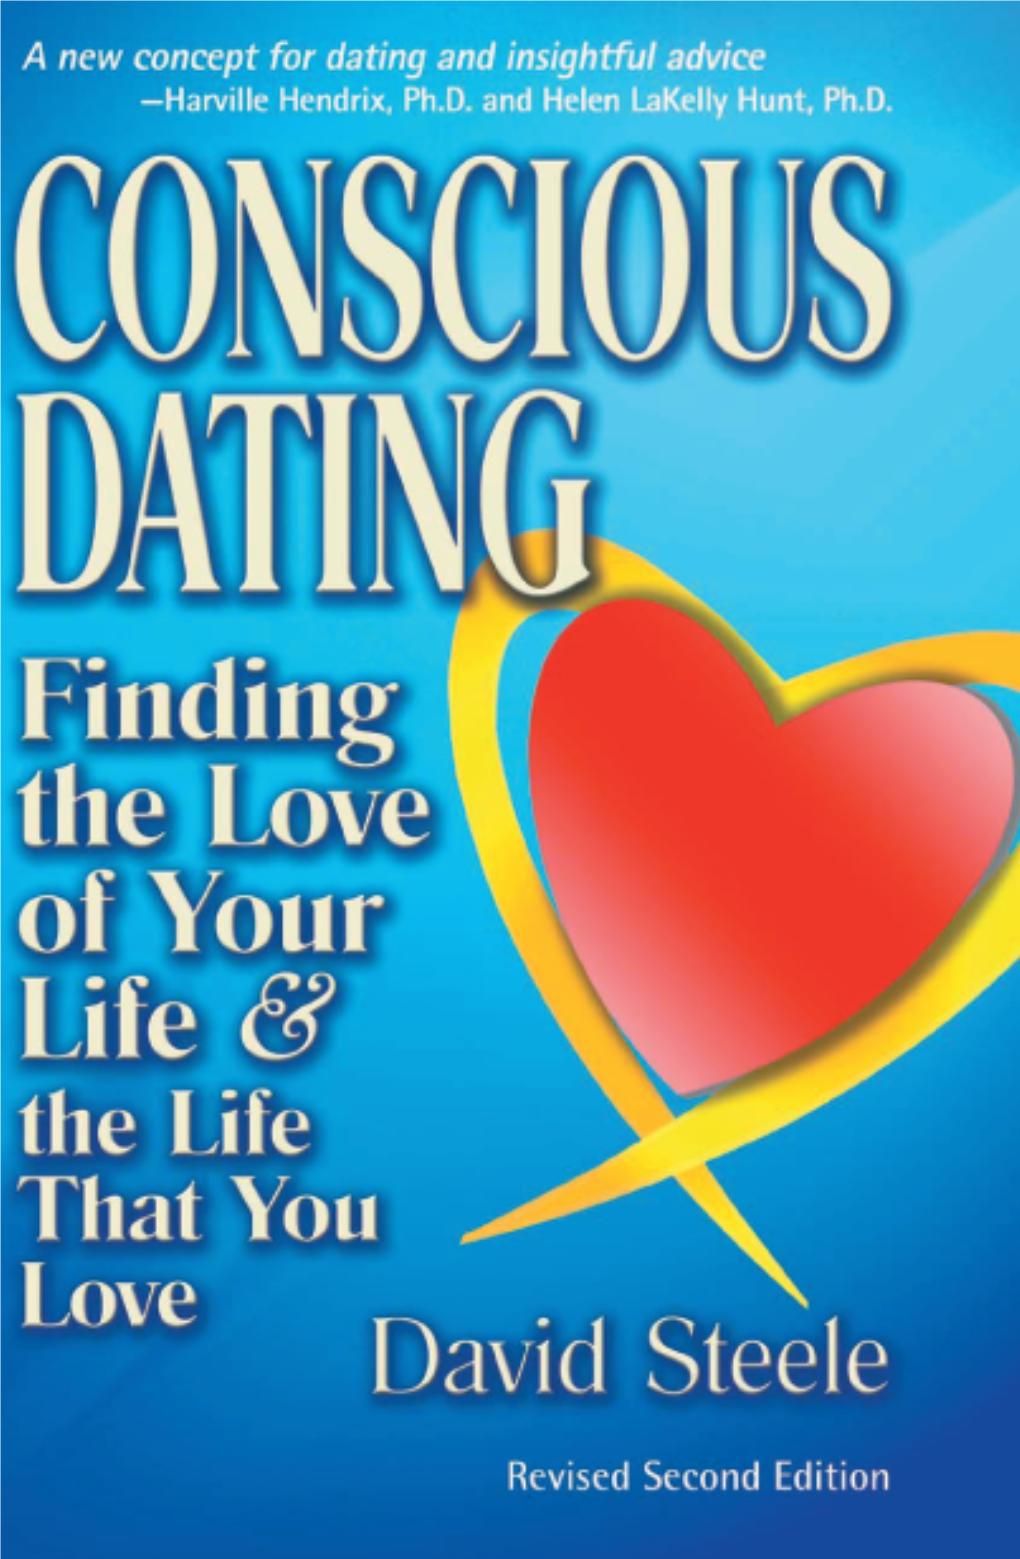 CONSCIOUS DATING Finding the Love of Your& Life the Life That You Love David Steele